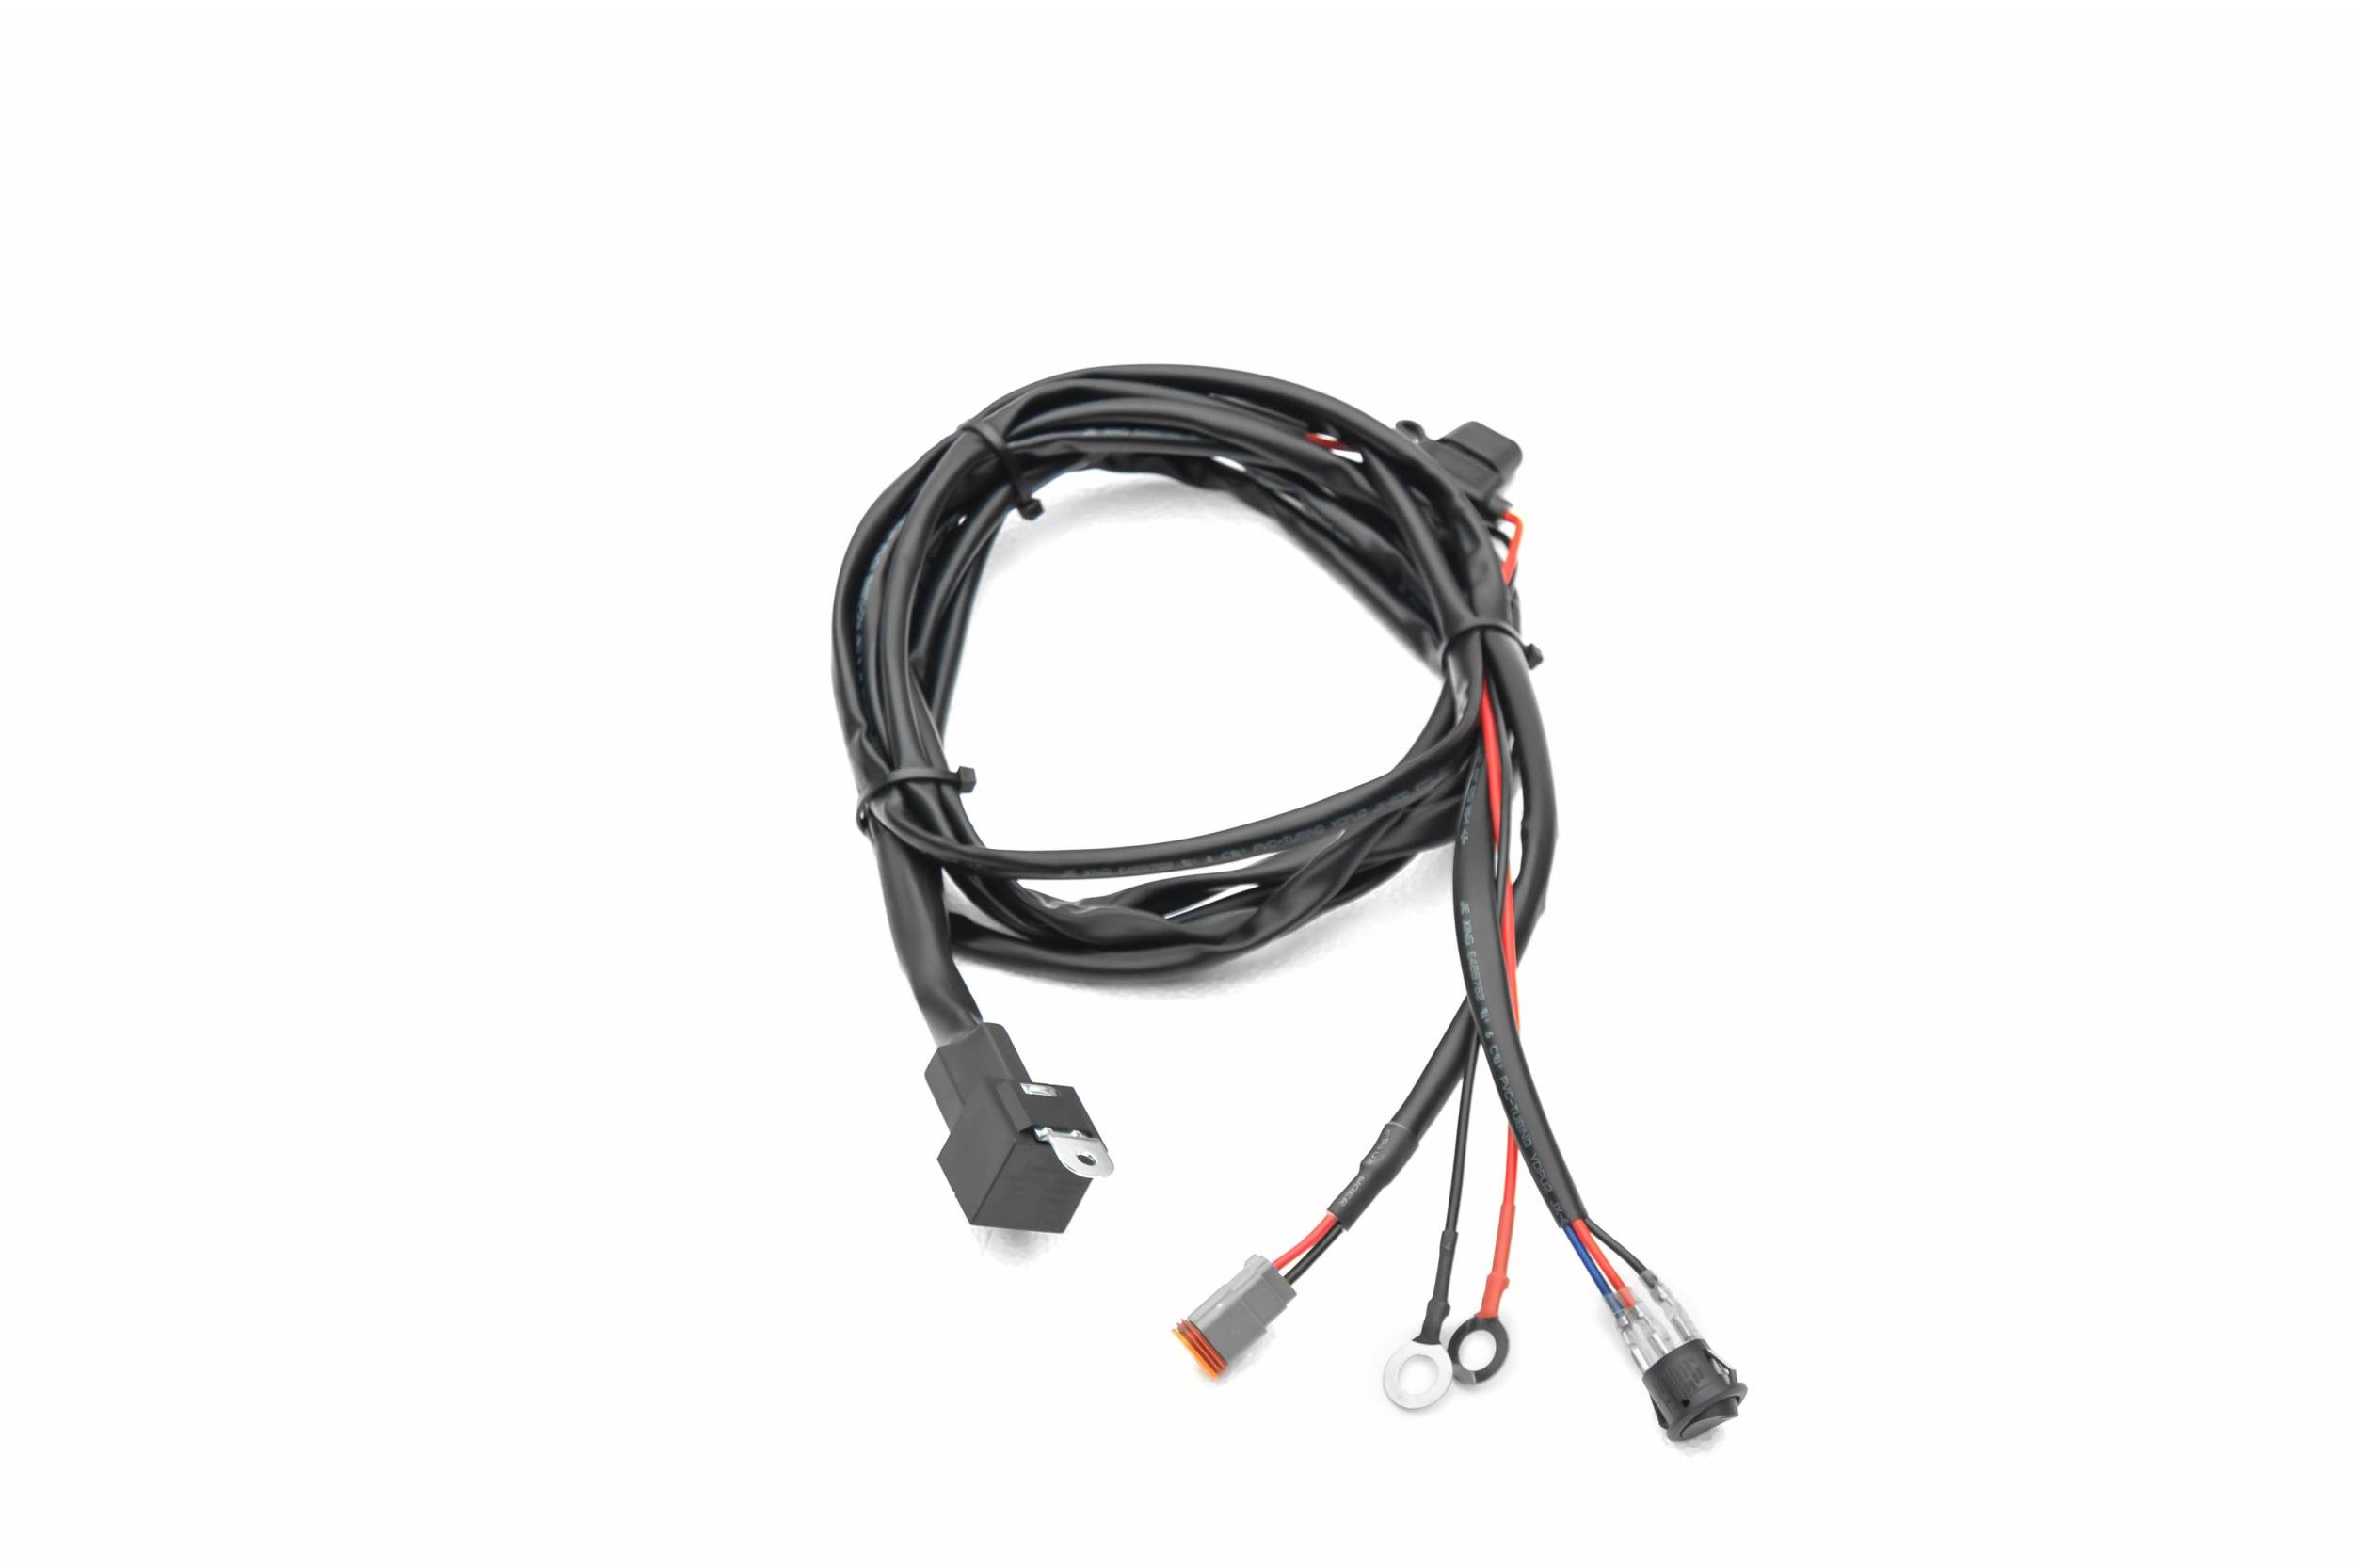 ZROADZ OFF ROAD PRODUCTS - Universal 9 FT DT Series Wiring Harness to connect 1  LED Light Bar, 200 Watt or below - PN #Z390020S-A